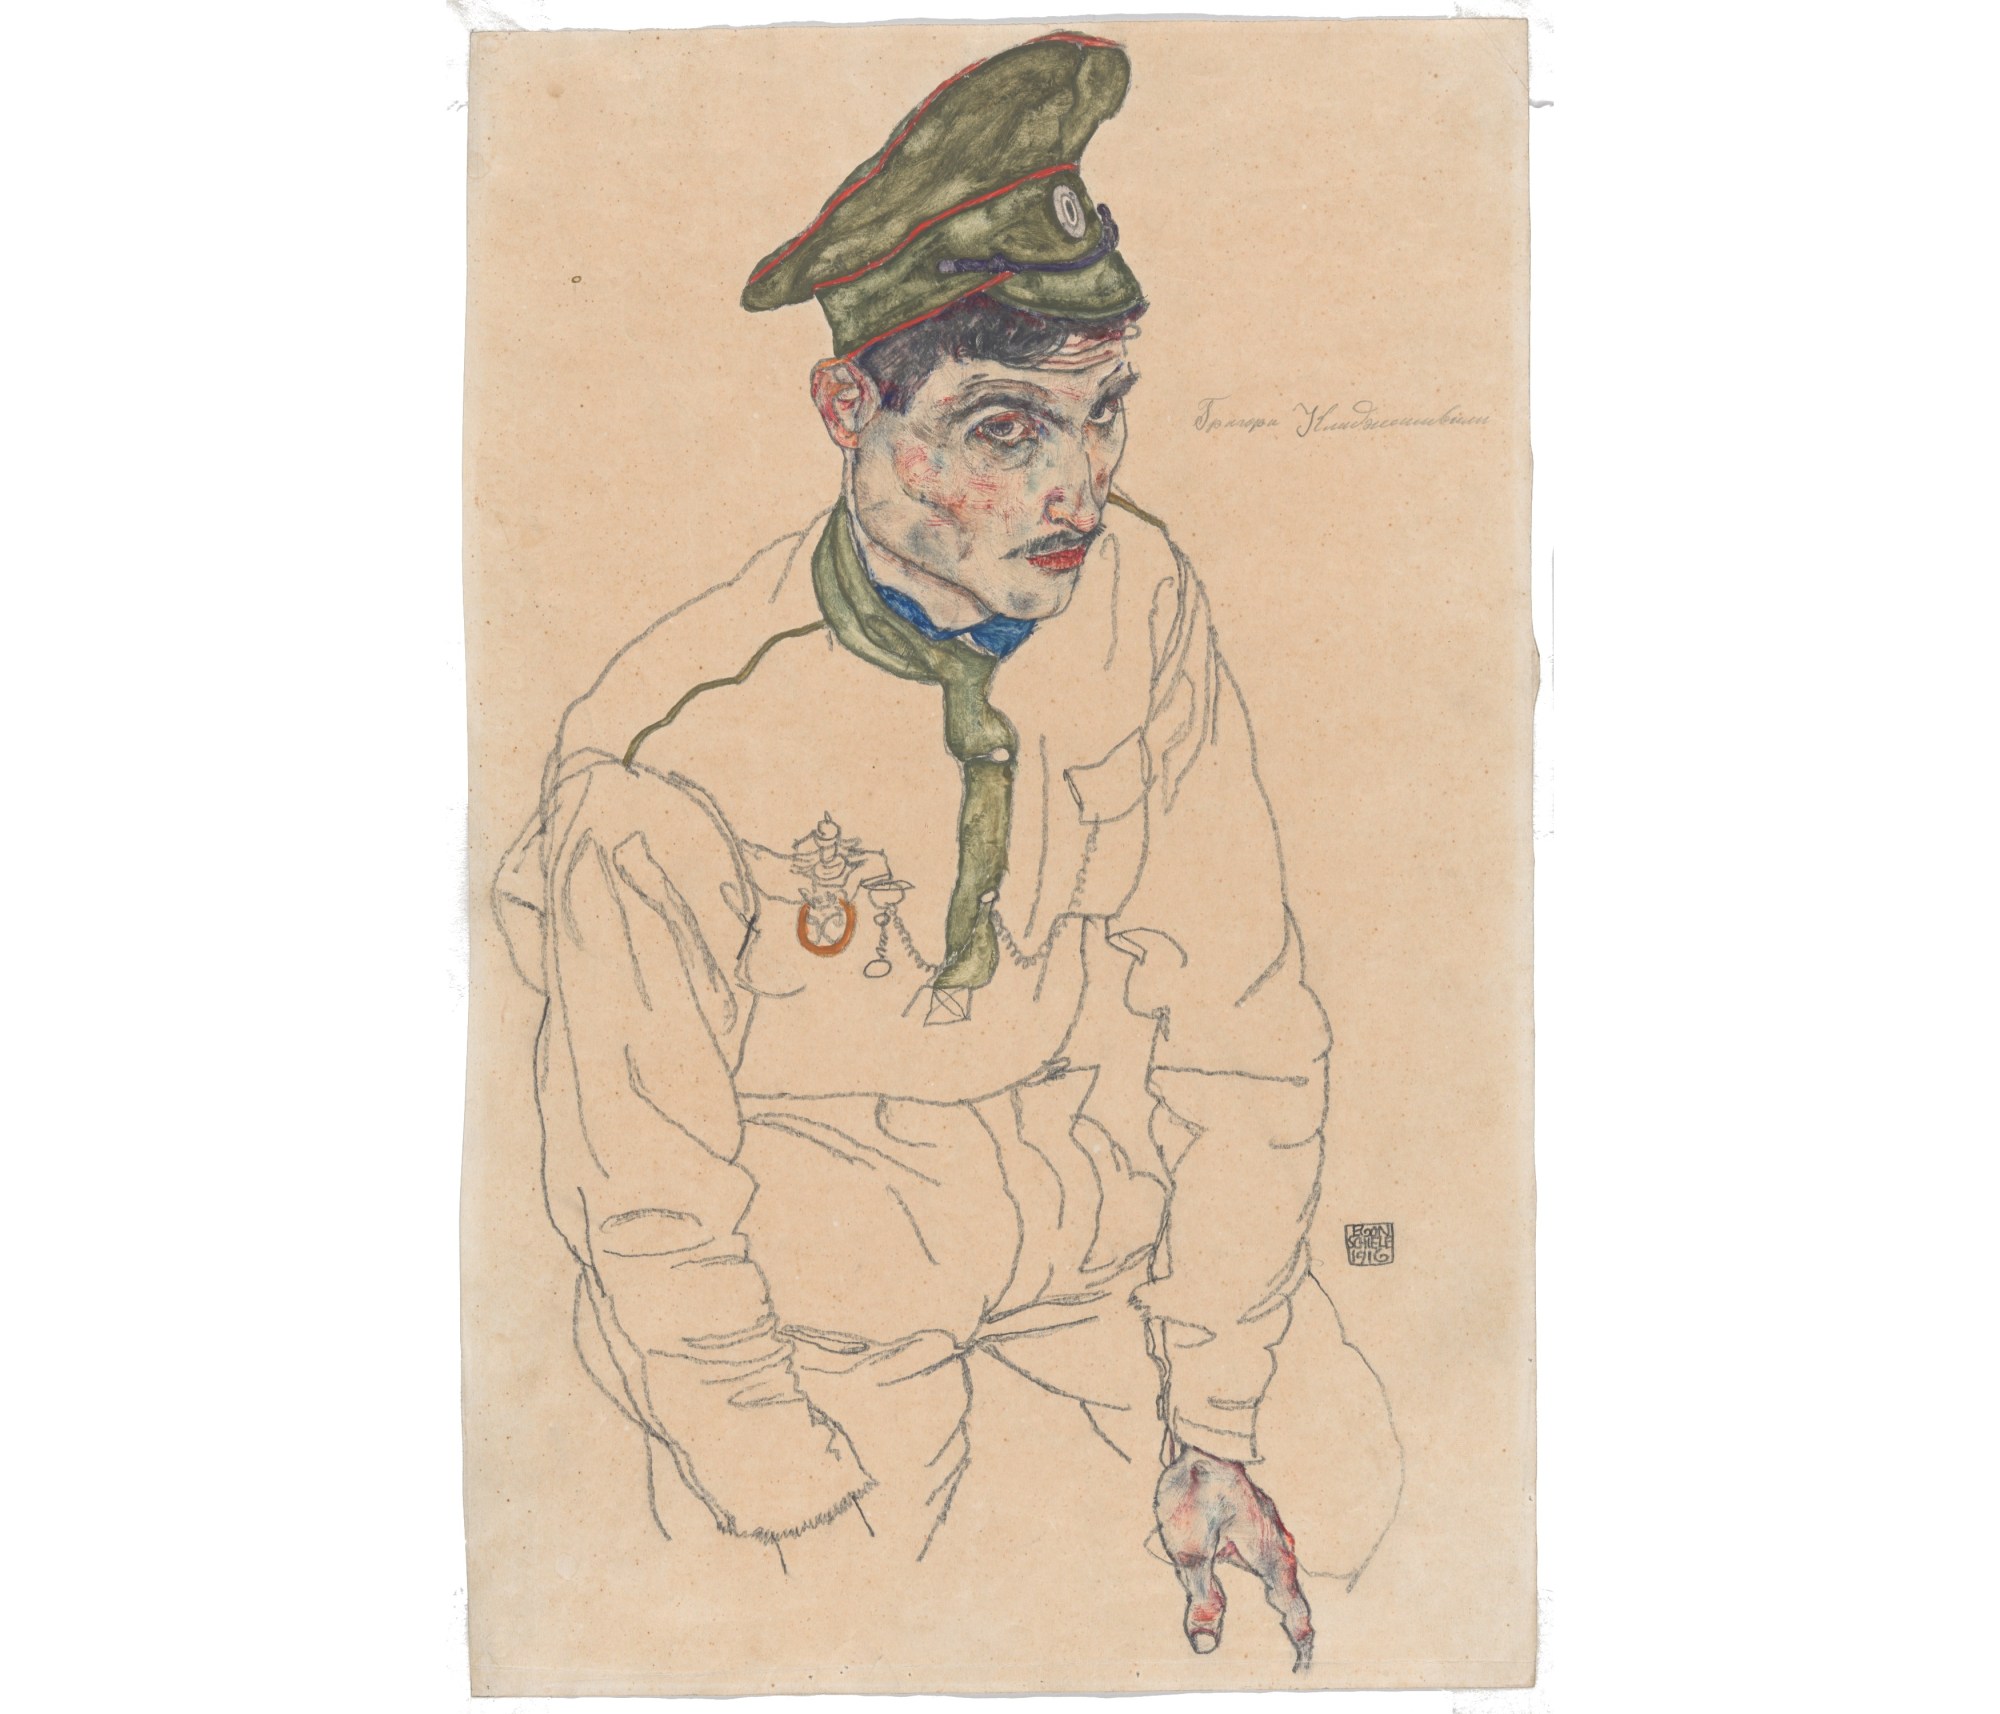 Egon Schiele's “Russian War Prisoner” (1916), an 
opaque watercolor, over graphite, on cream wove paper. It was recently seized from the Art Institute of Chicago.